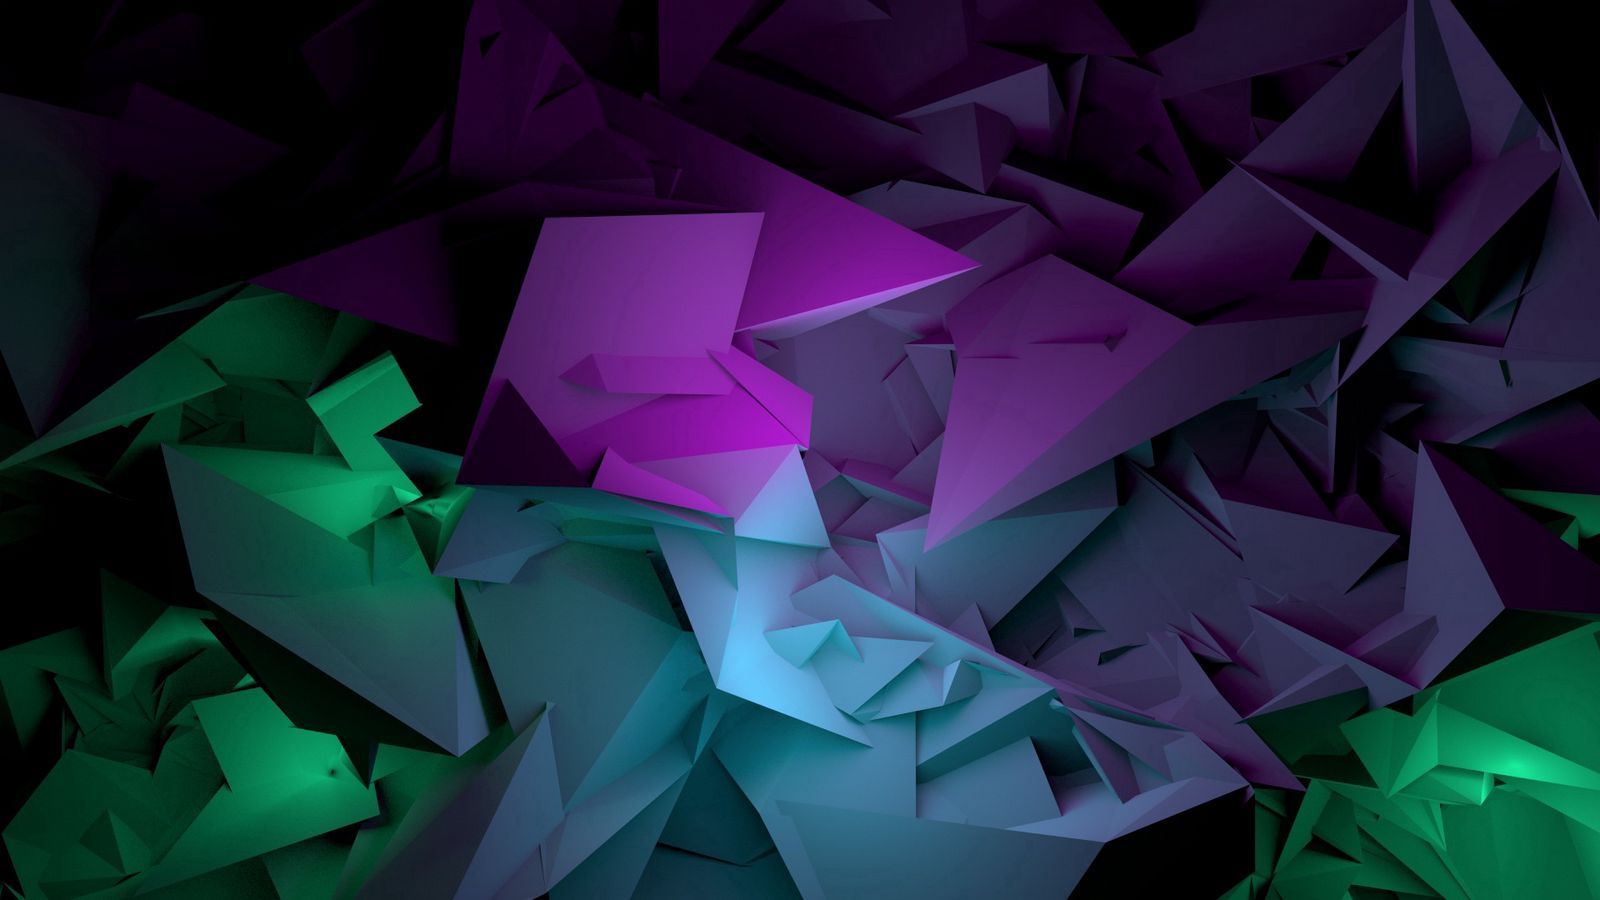 Download wallpapers 1600x900 abstract, shapes, purple, green widescreen 16:9 hd backgrounds